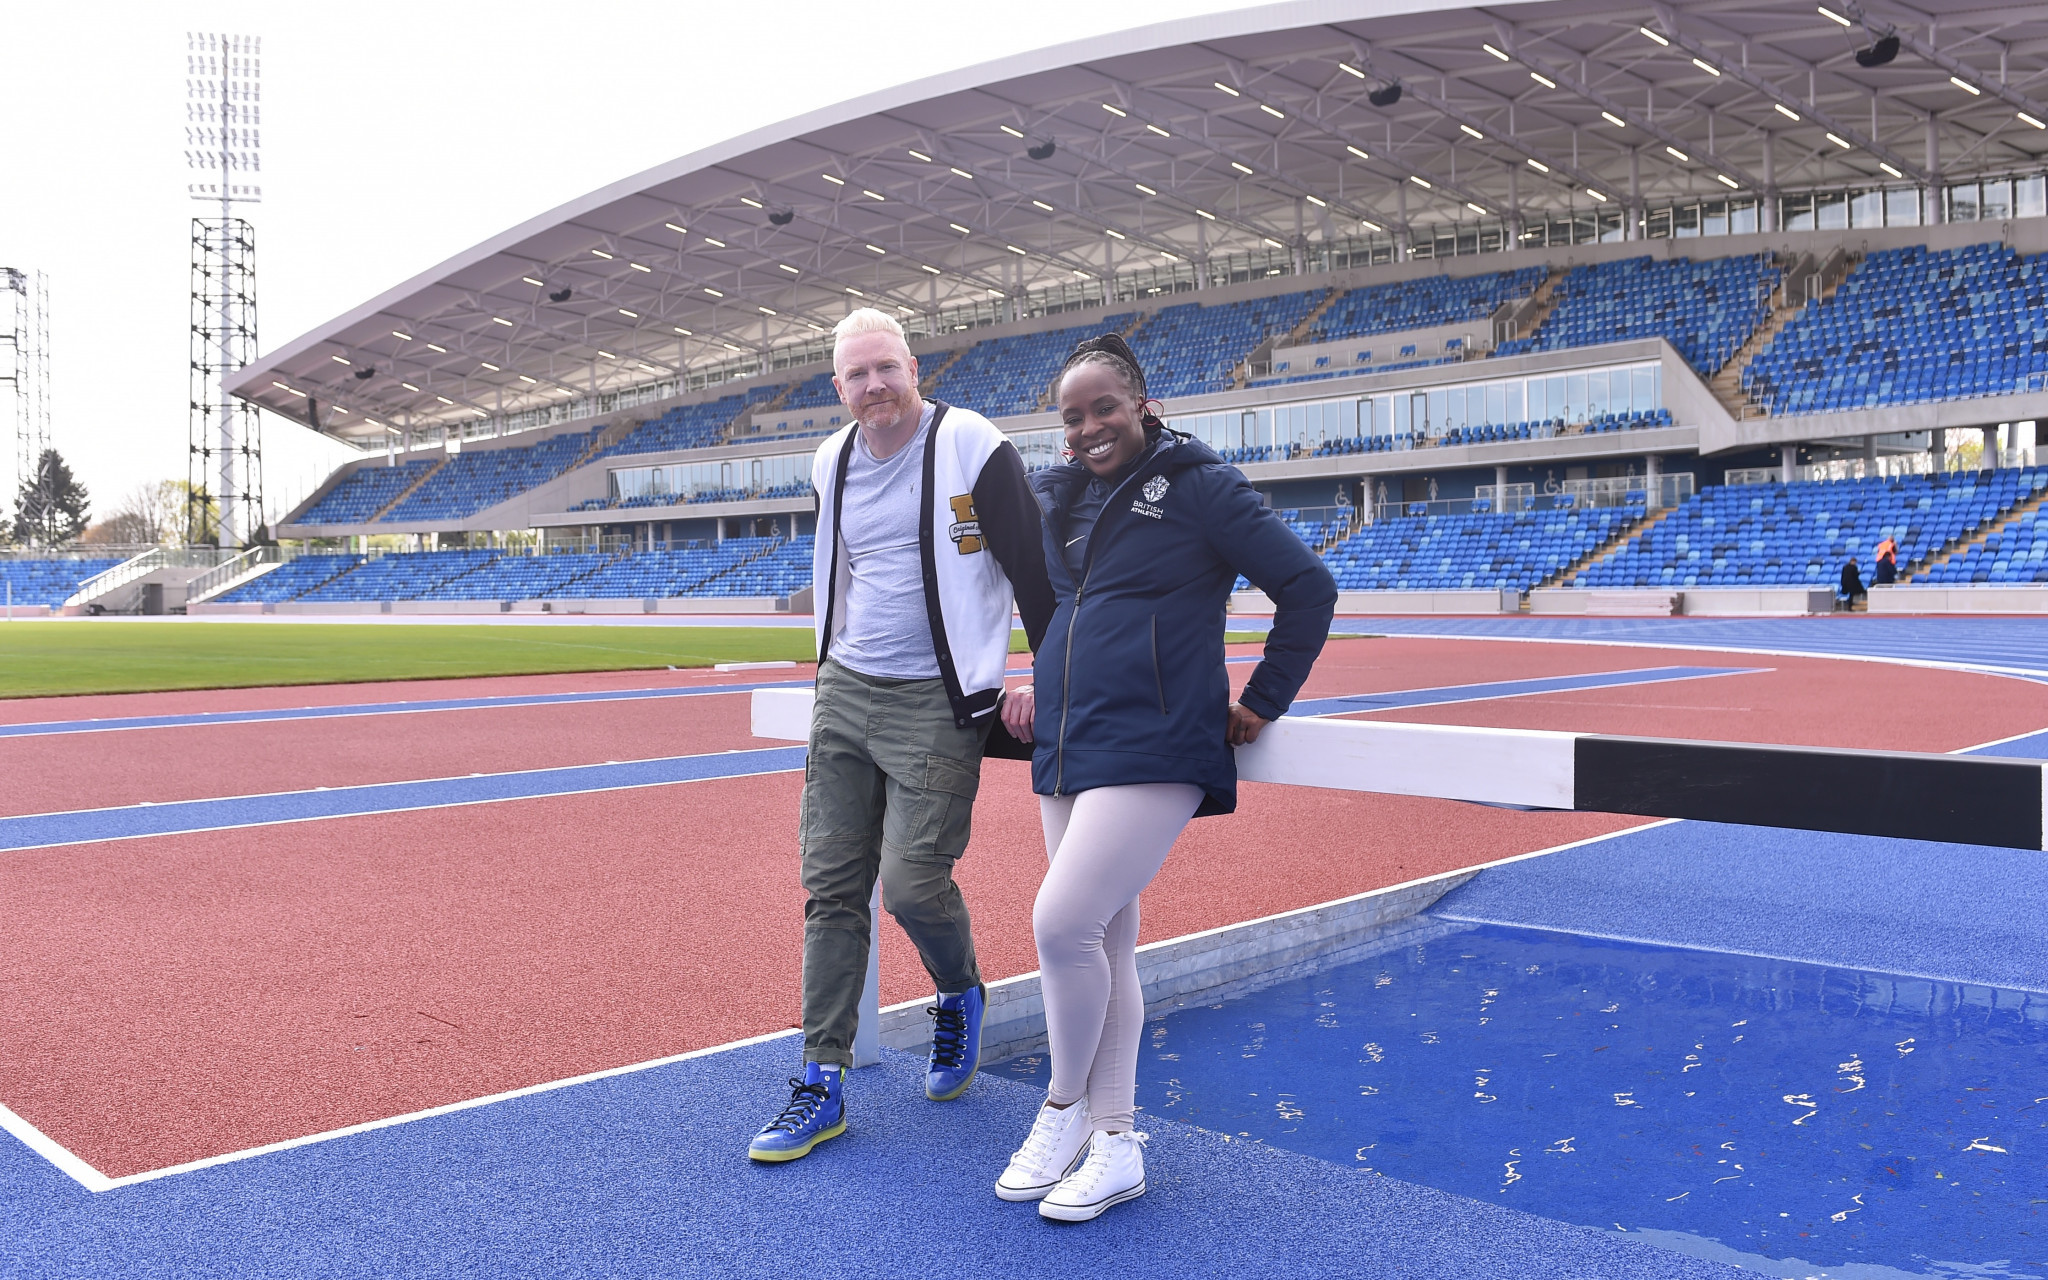 Key Birmingham 2022 venue backed to become "home of athletics" after holding first test event